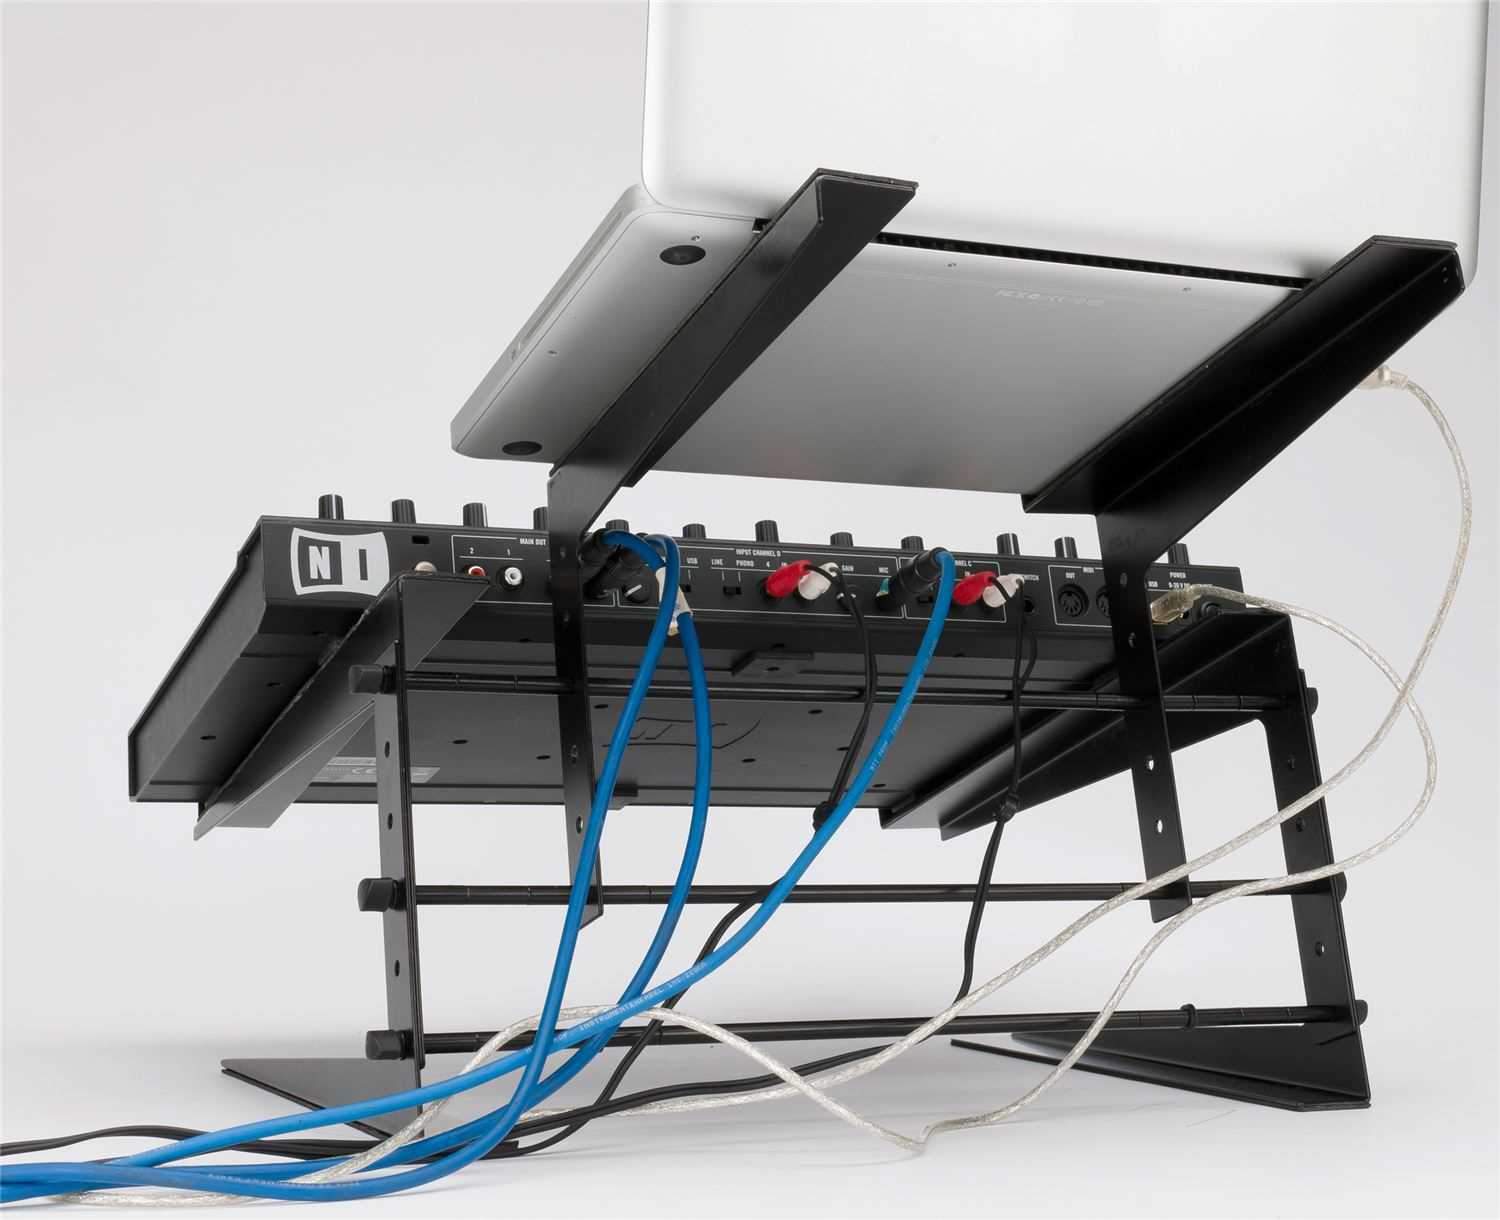 Magma MGA75540 Control Stand for Laptop & DJ Controller - ProSound and Stage Lighting